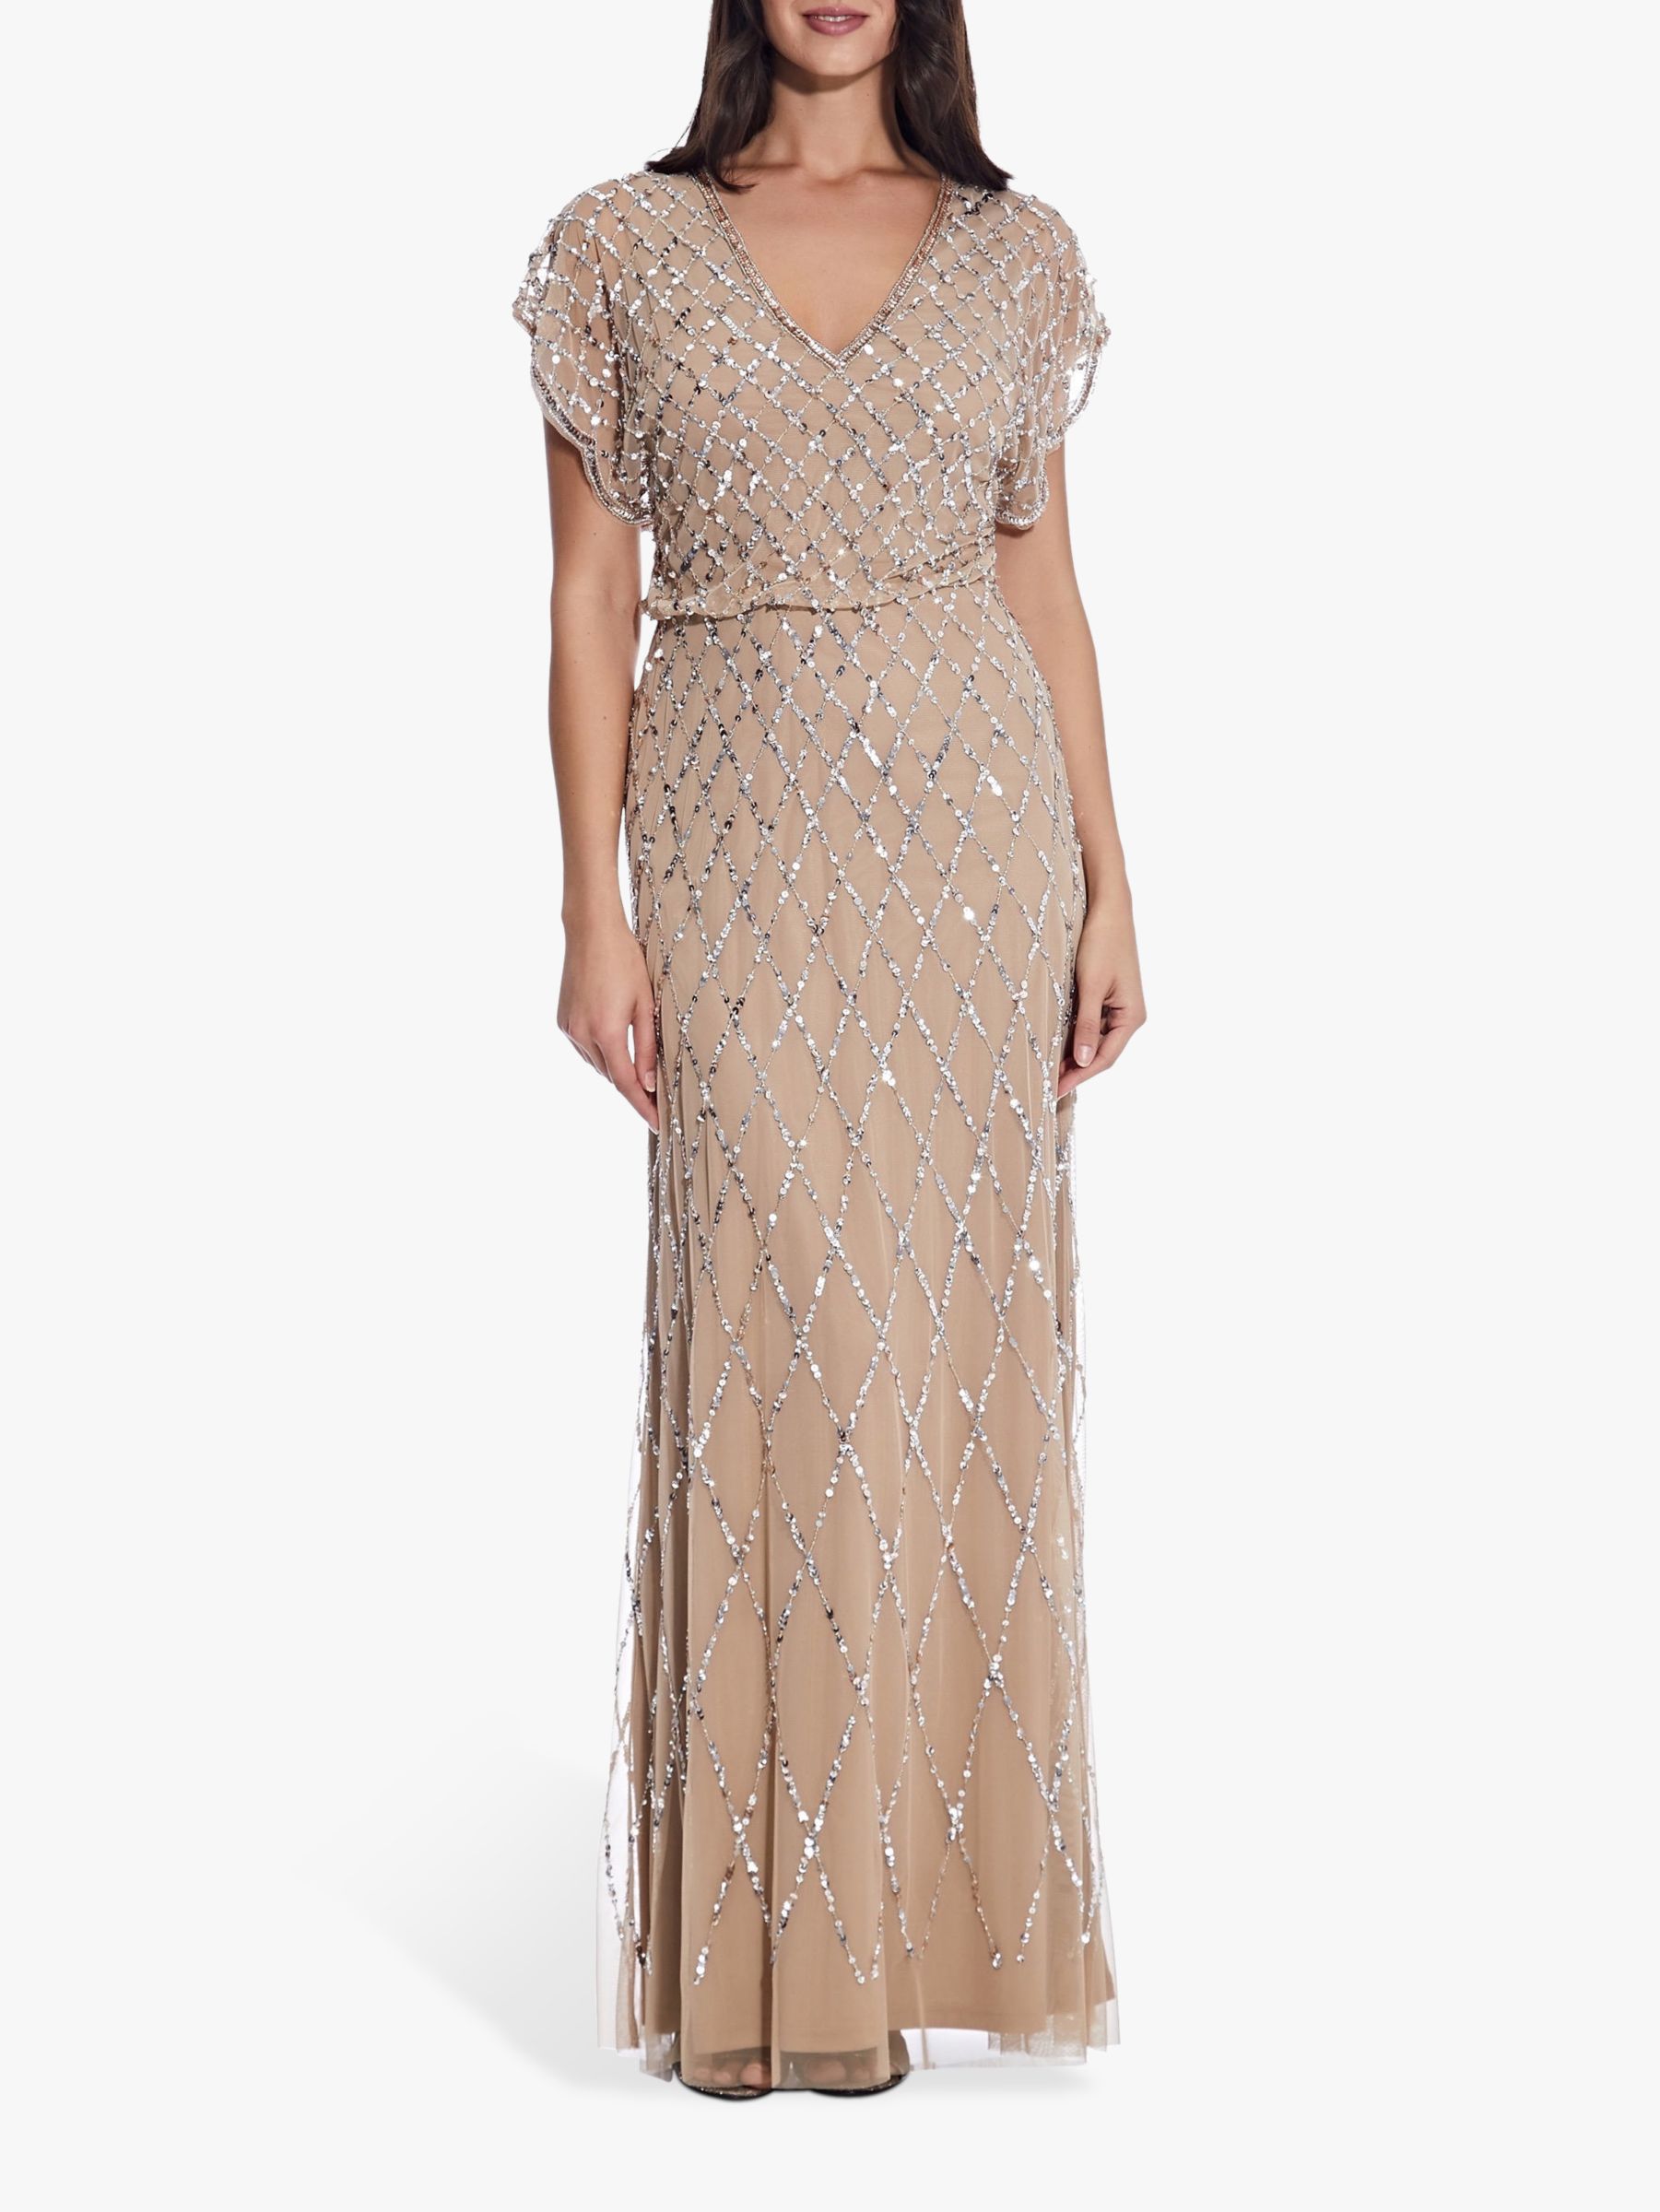 Adrianna Papell Blouson Beaded Maxi Dress, Champagne/Silver, 6